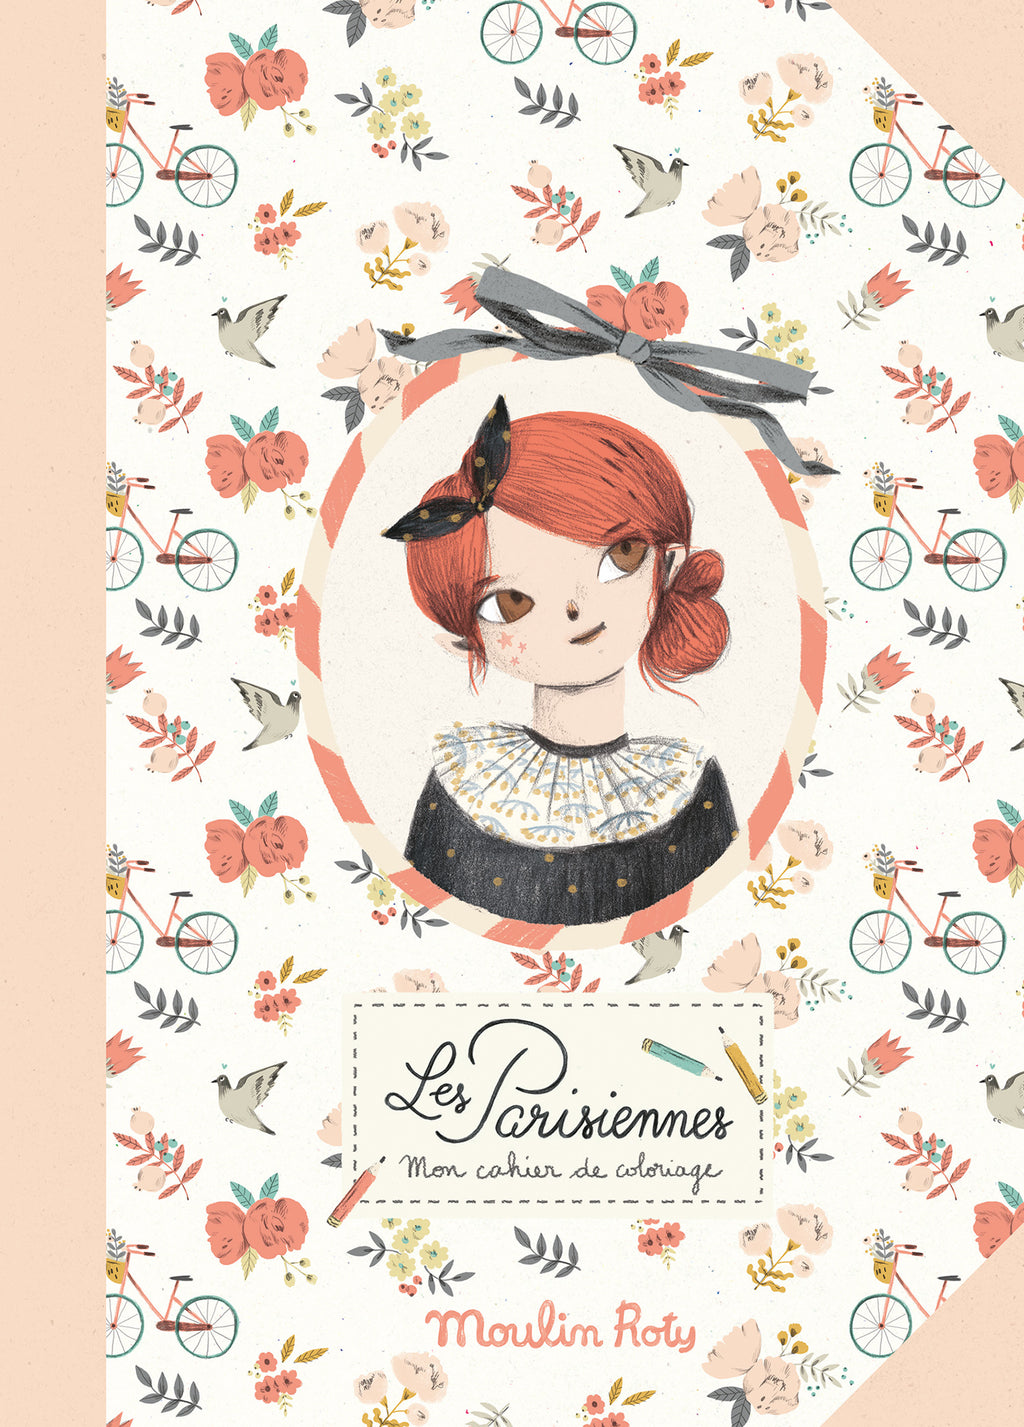 Moulin Roty | Les Parisiennes Colouring Book | 36 Pages